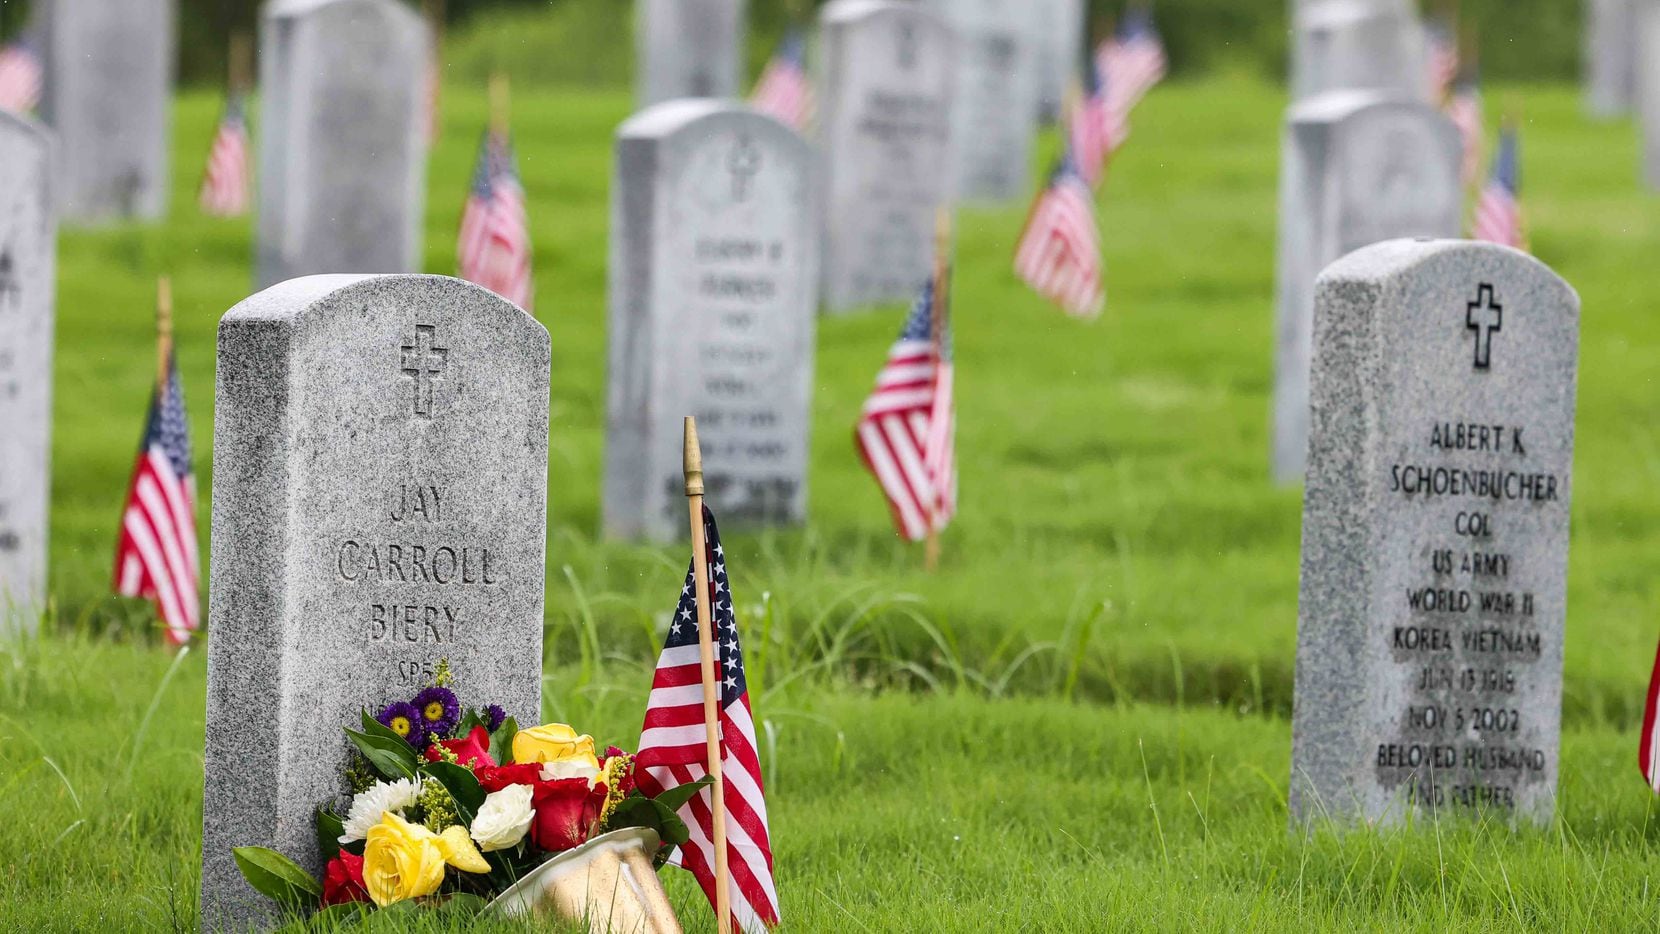 Dallas-Fort Worth National Cemetery in Dallas on Memorial Day, May 31, 2021.